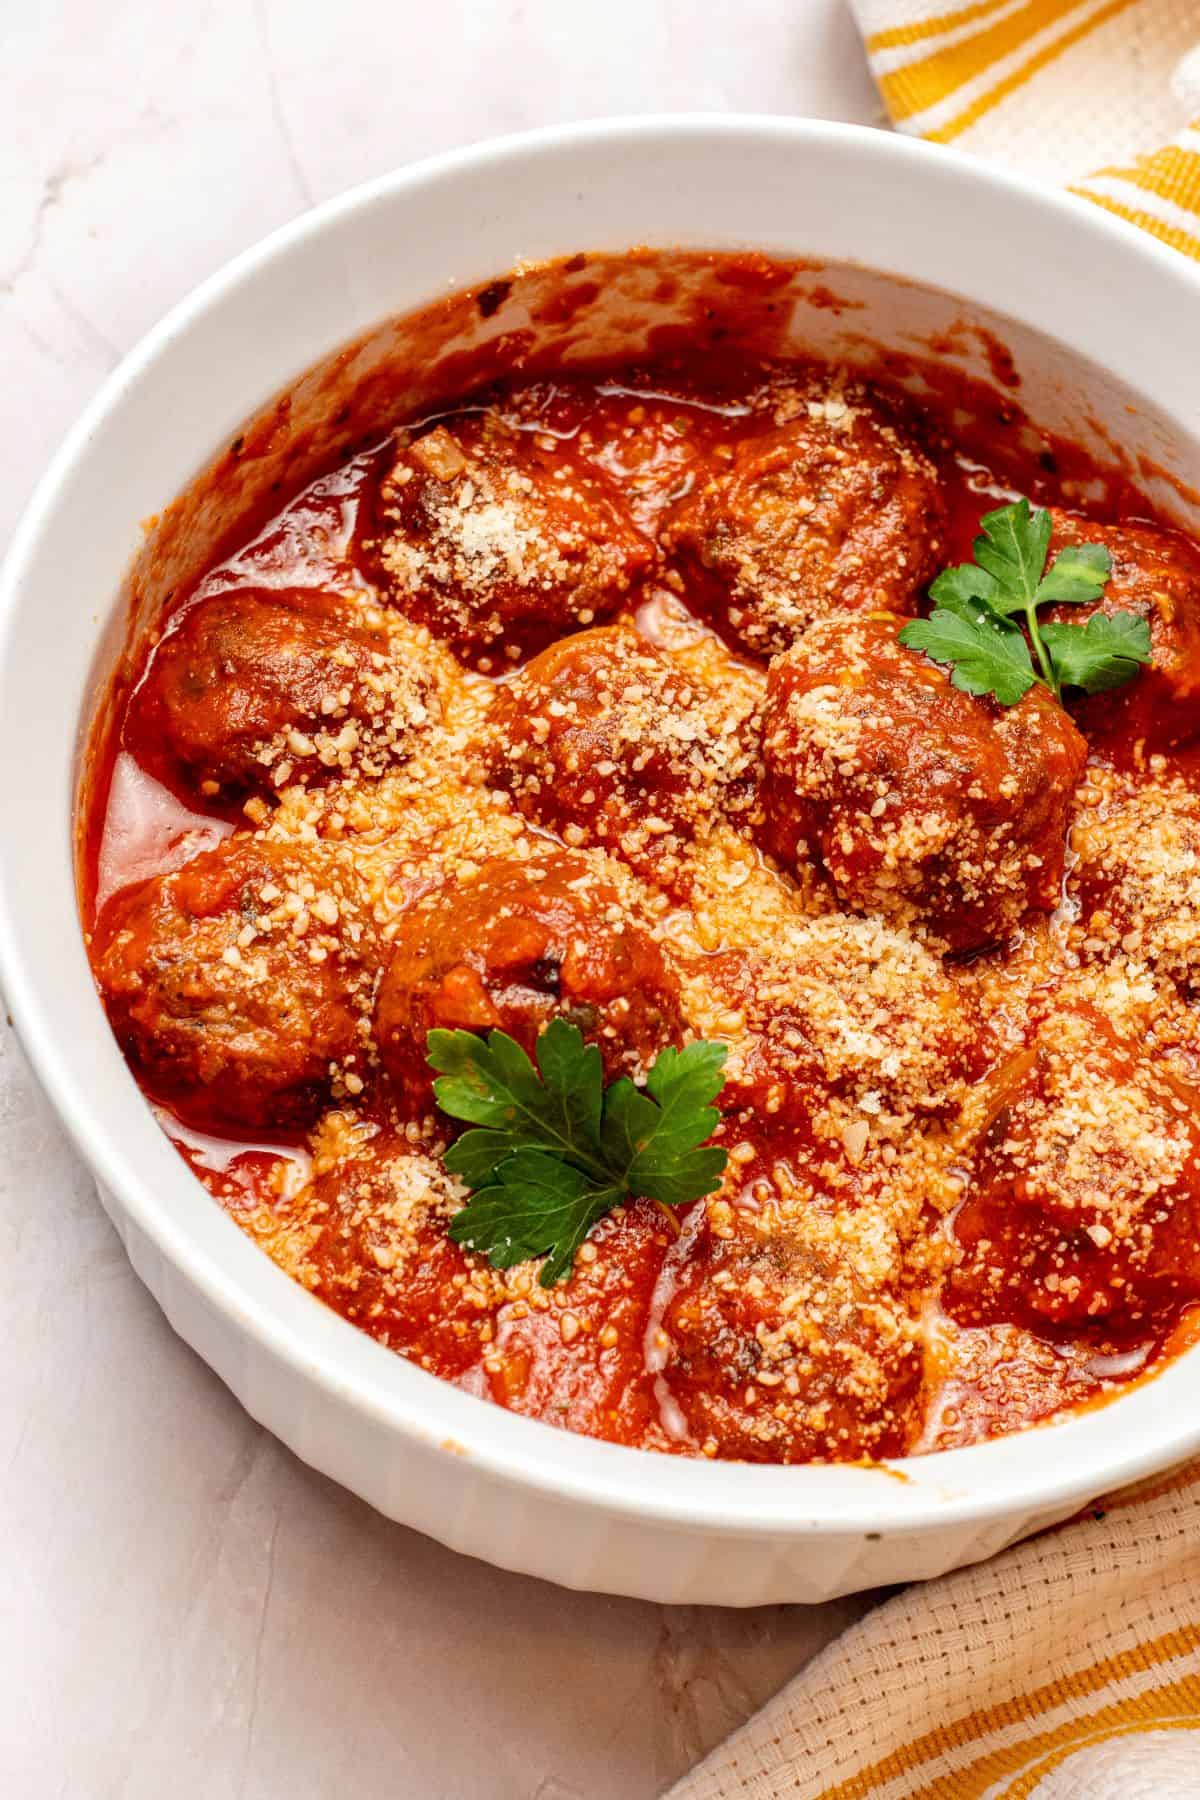 Meatballs in tomato sauce in a serving dish.